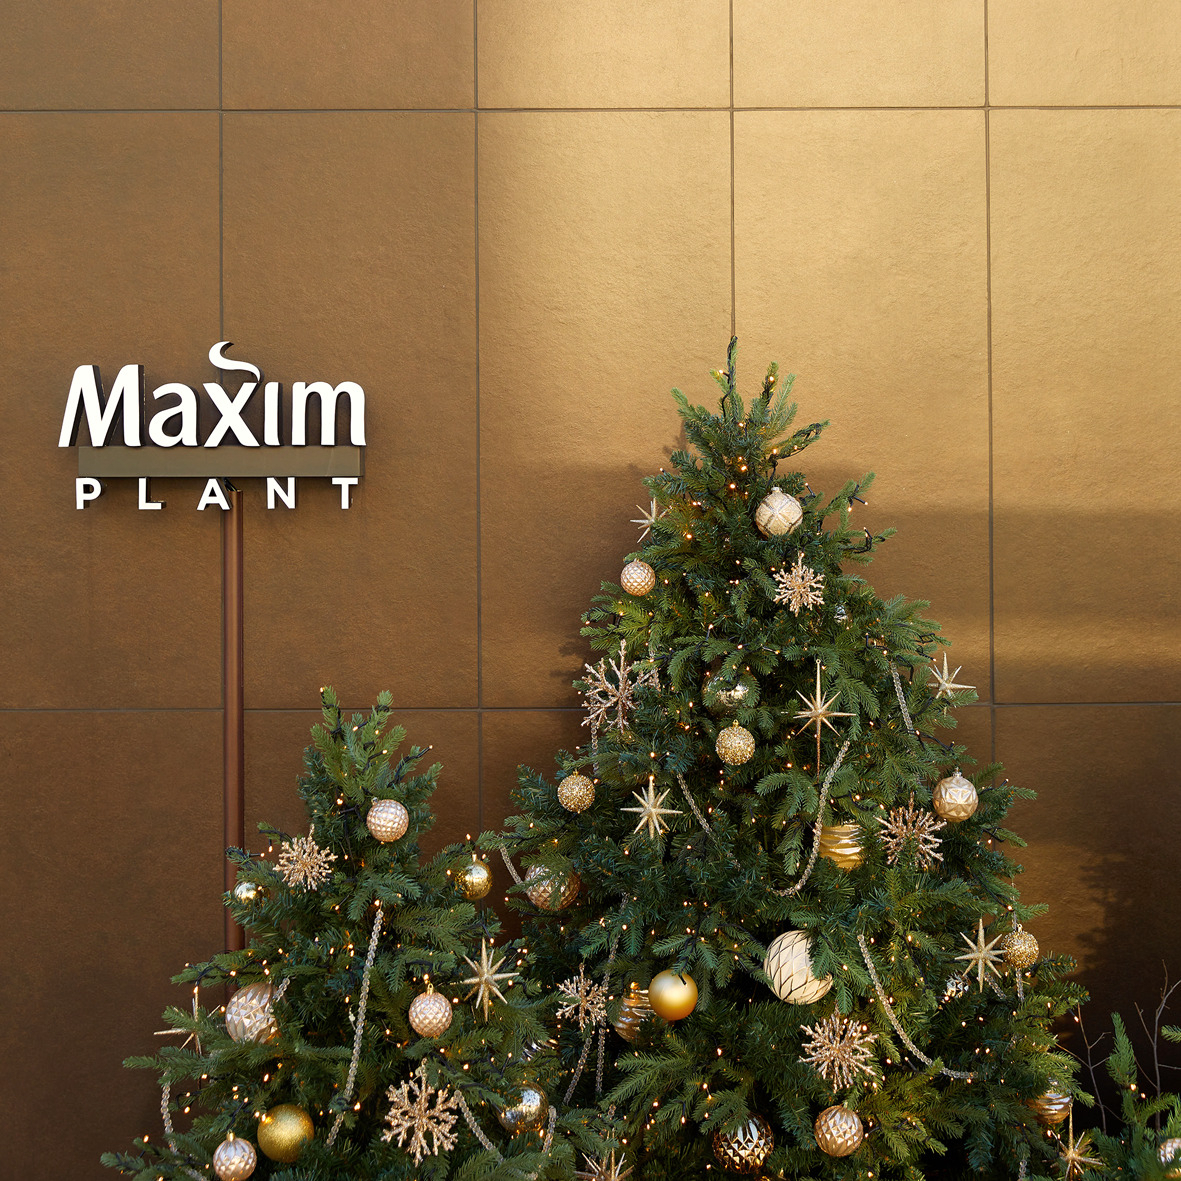 Dongsuh Foods' cultural center, Maxim Plant, is decorated with Christmas trees, in Hannam-dong, a neighborhood in central Seoul. (Dongsuh Foods)